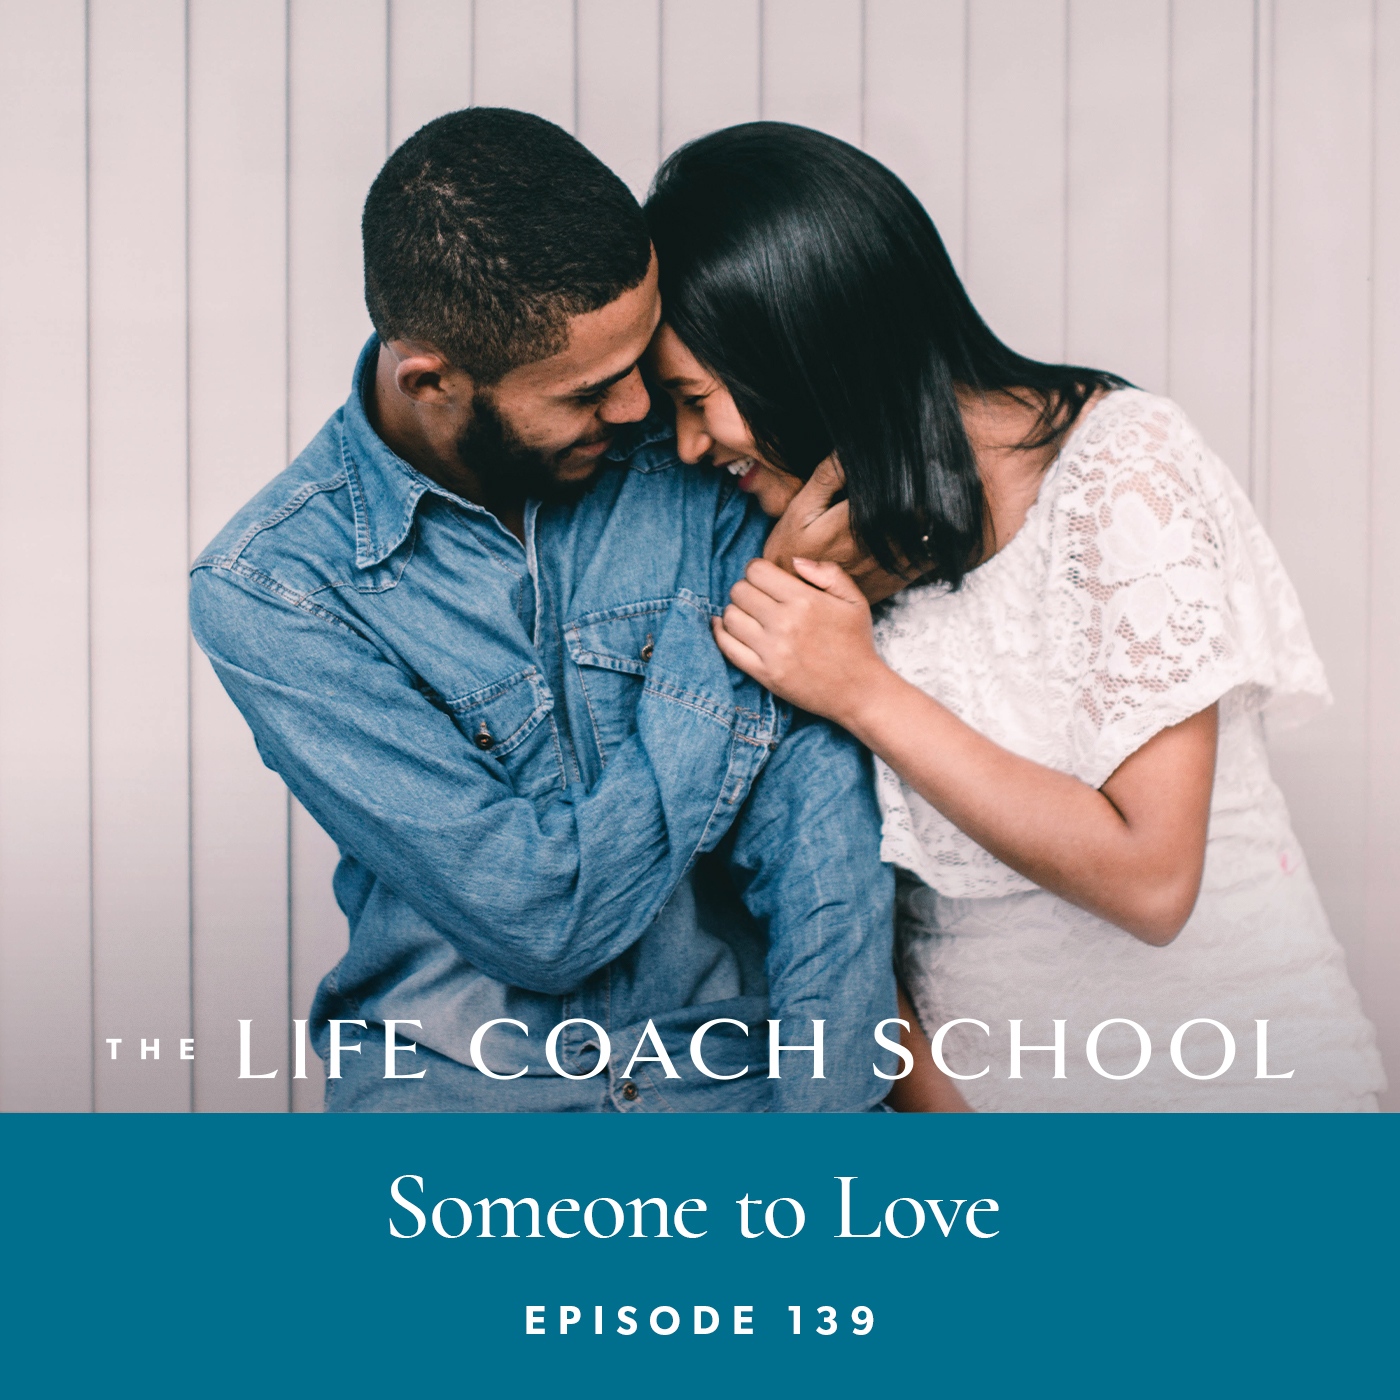 The Life Coach School Podcast with Brooke Castillo | Episode 139 | Someone to Love